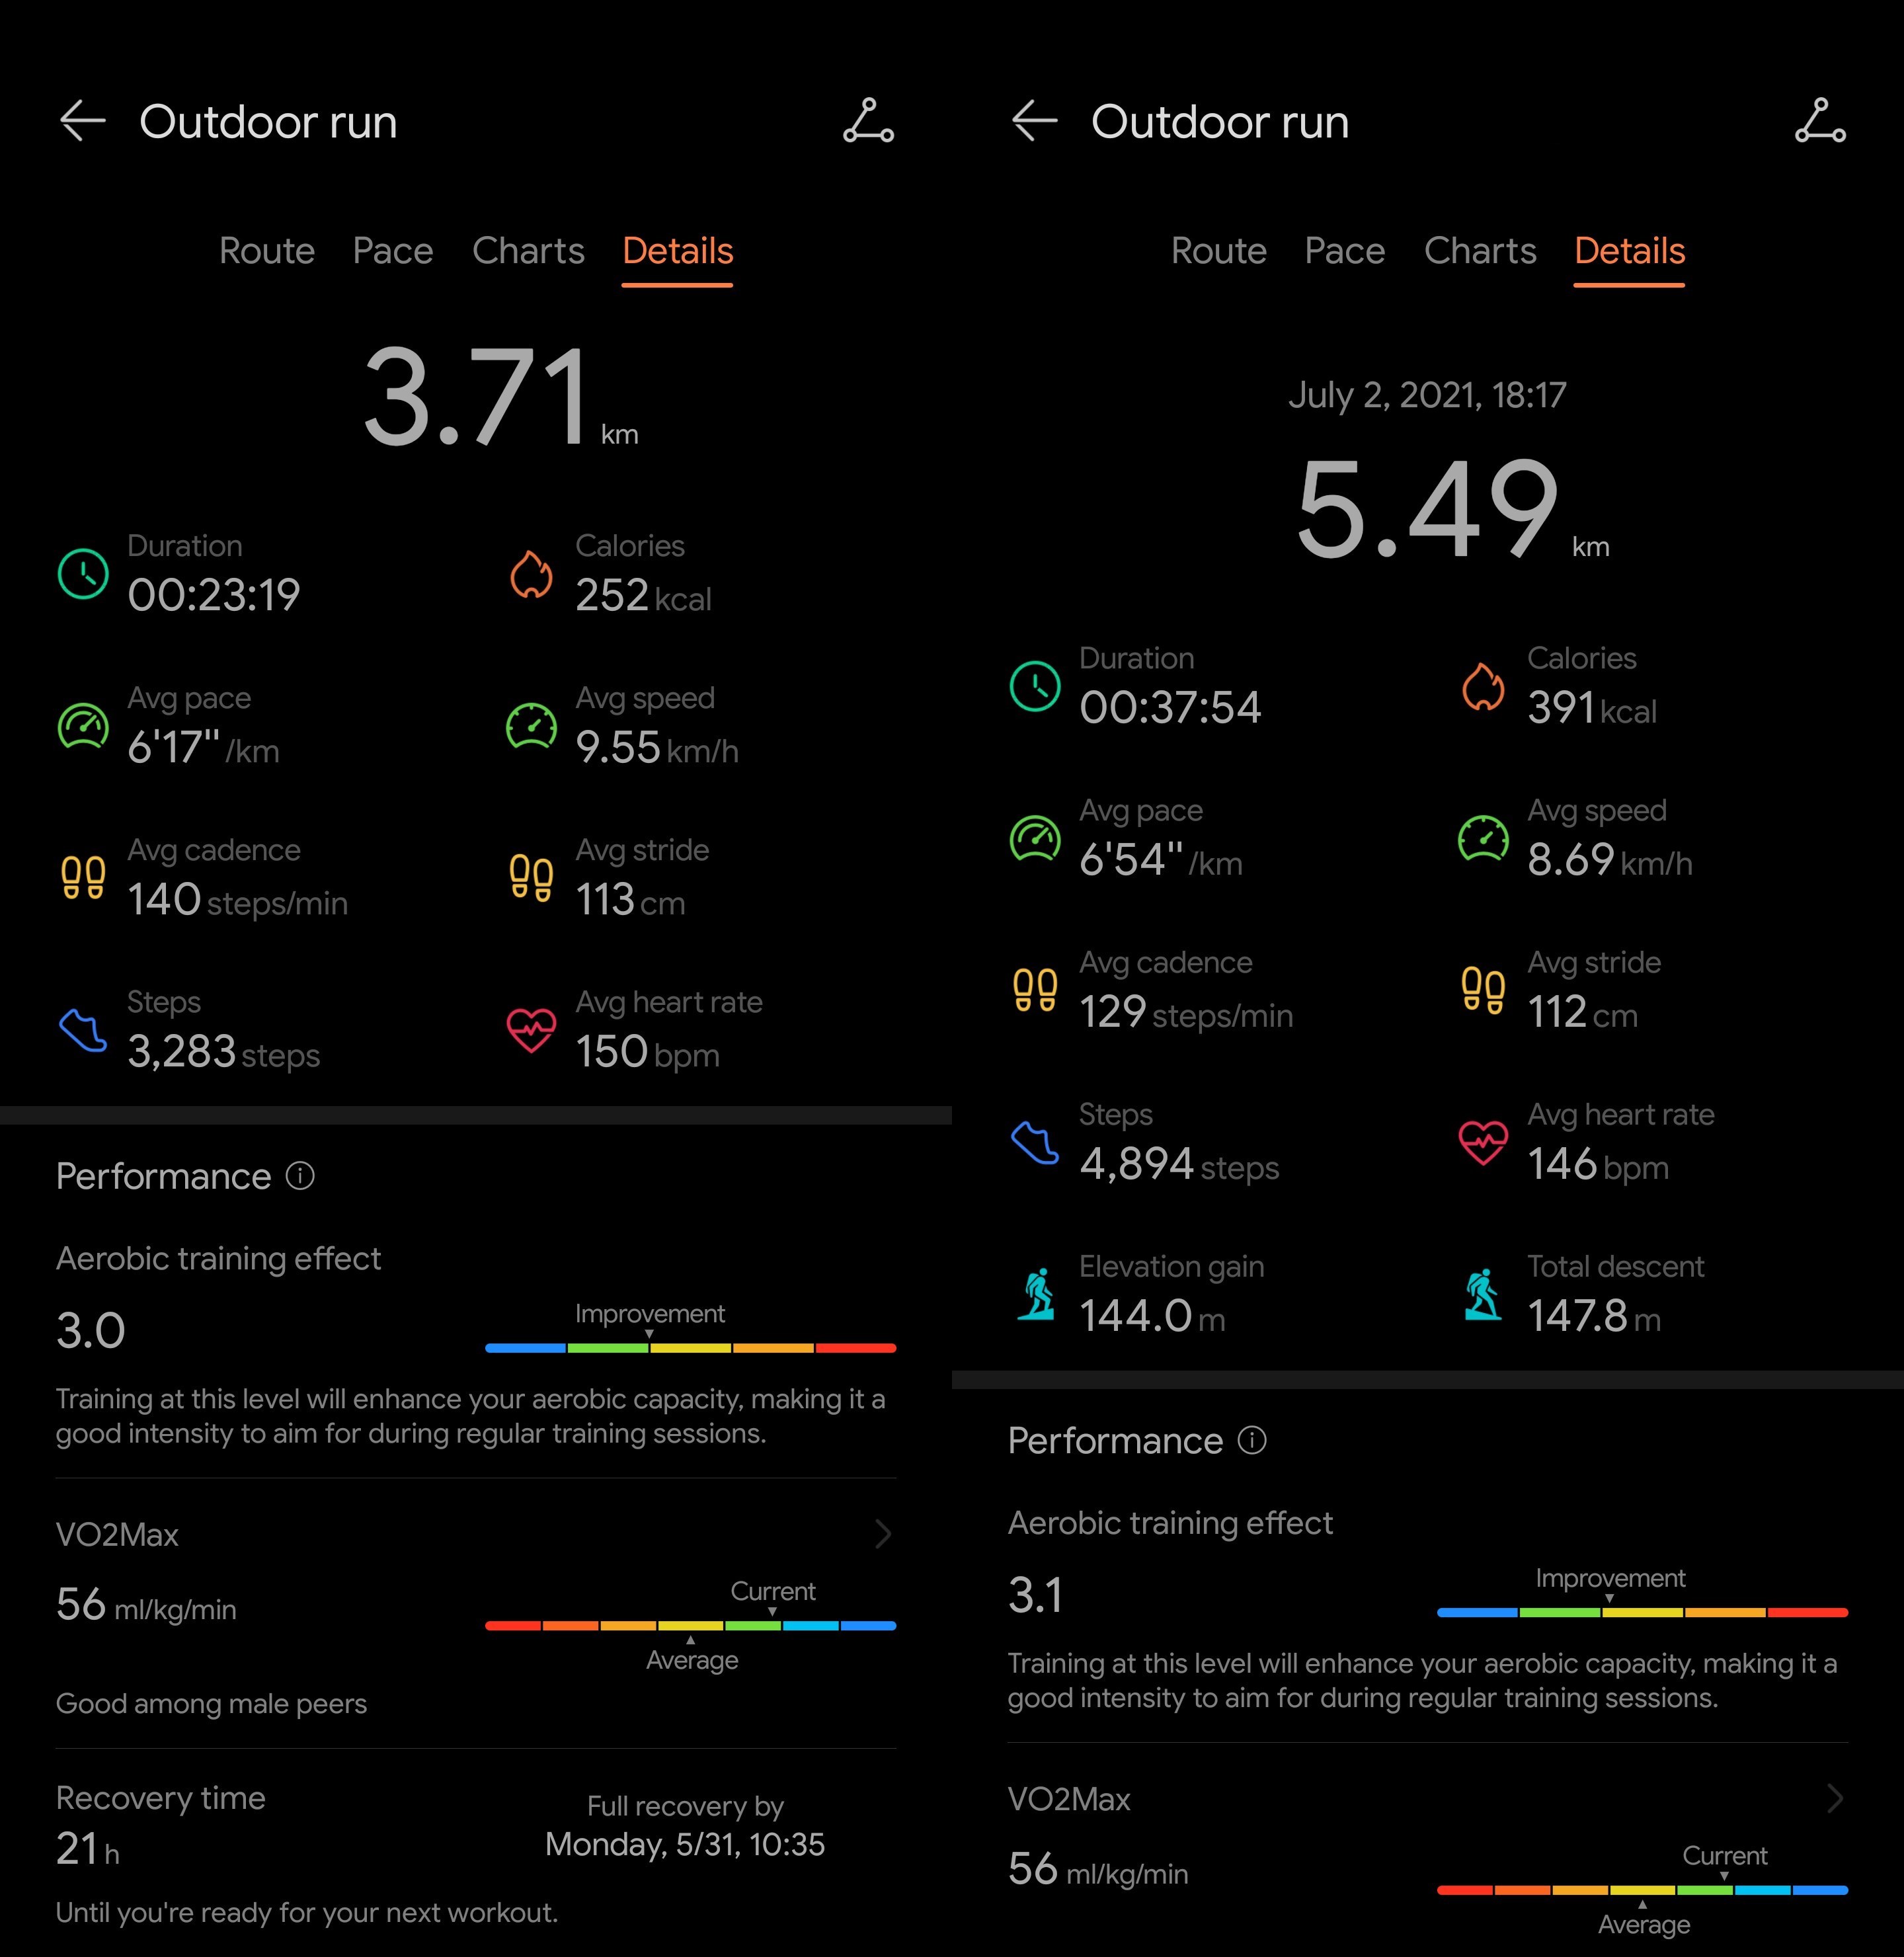 workout data from 2 different devices